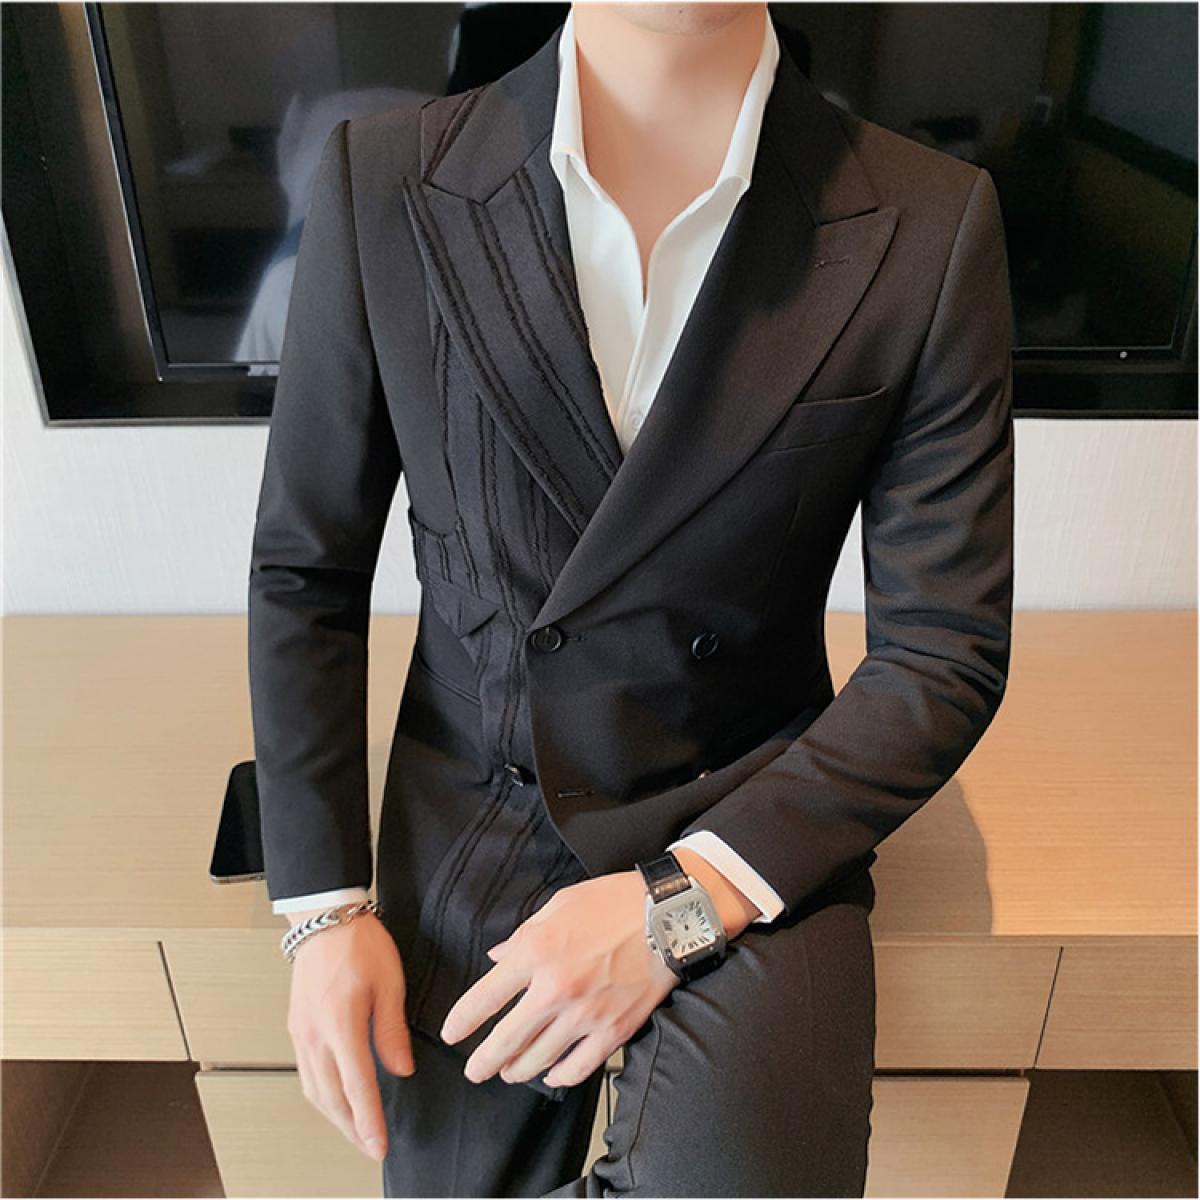 Men's Slim Fit Double Breasted Suit Jacket With Striped Patchwork, Casual Business Suit Coat With Double Vents